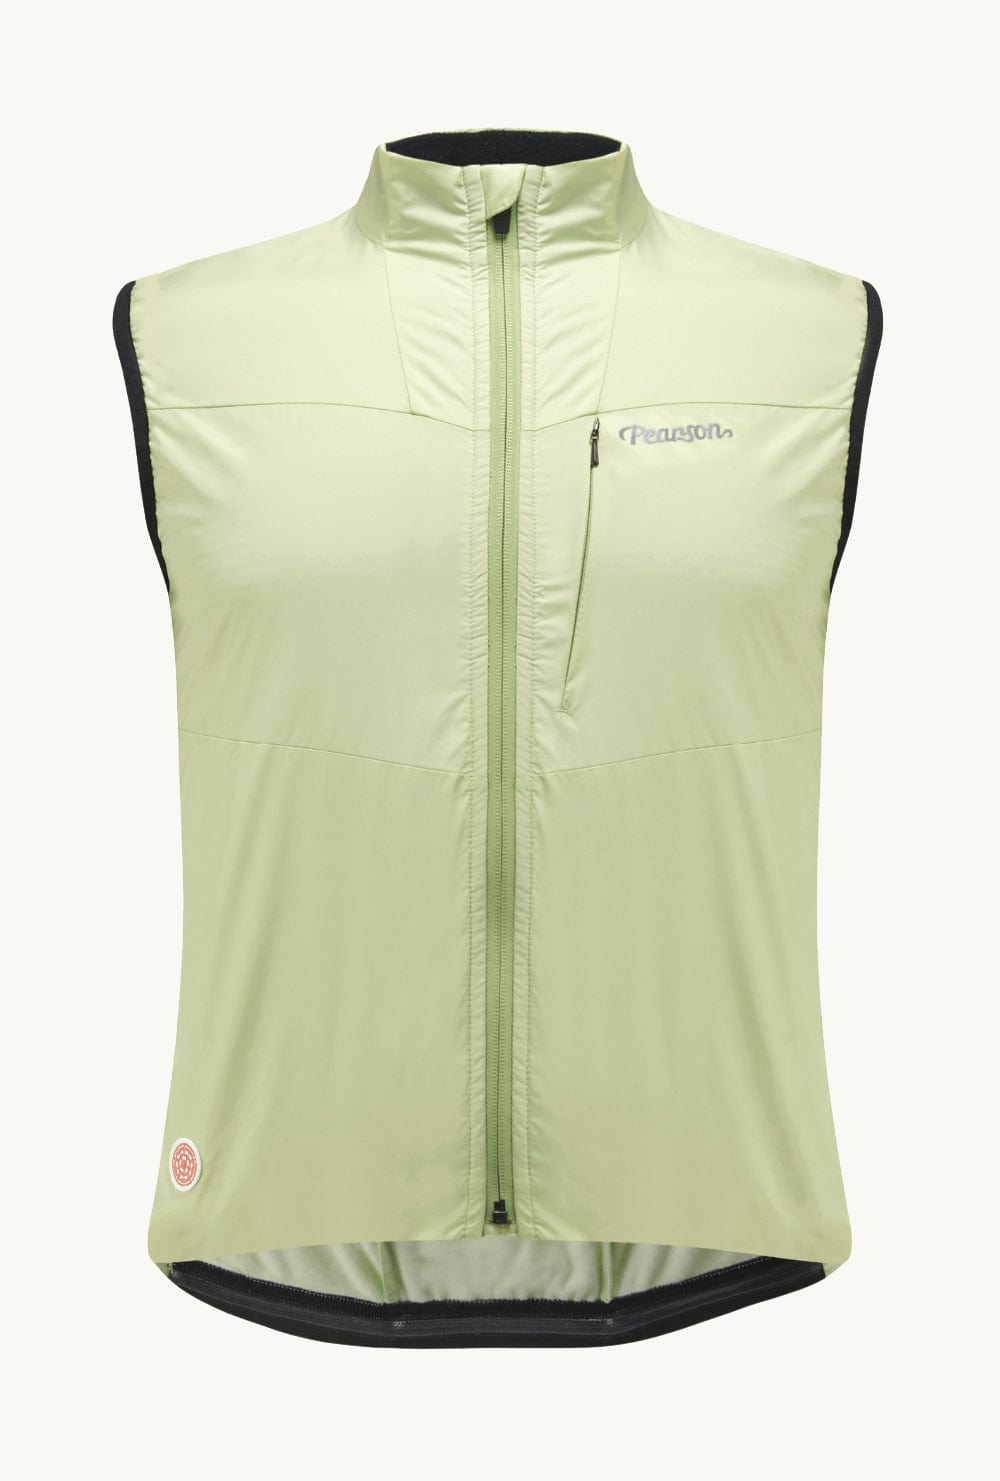 Pearson 1860  Feel The Benefits - Road Insulated Gilet Shadow Lime  Medium / Shadow Lime